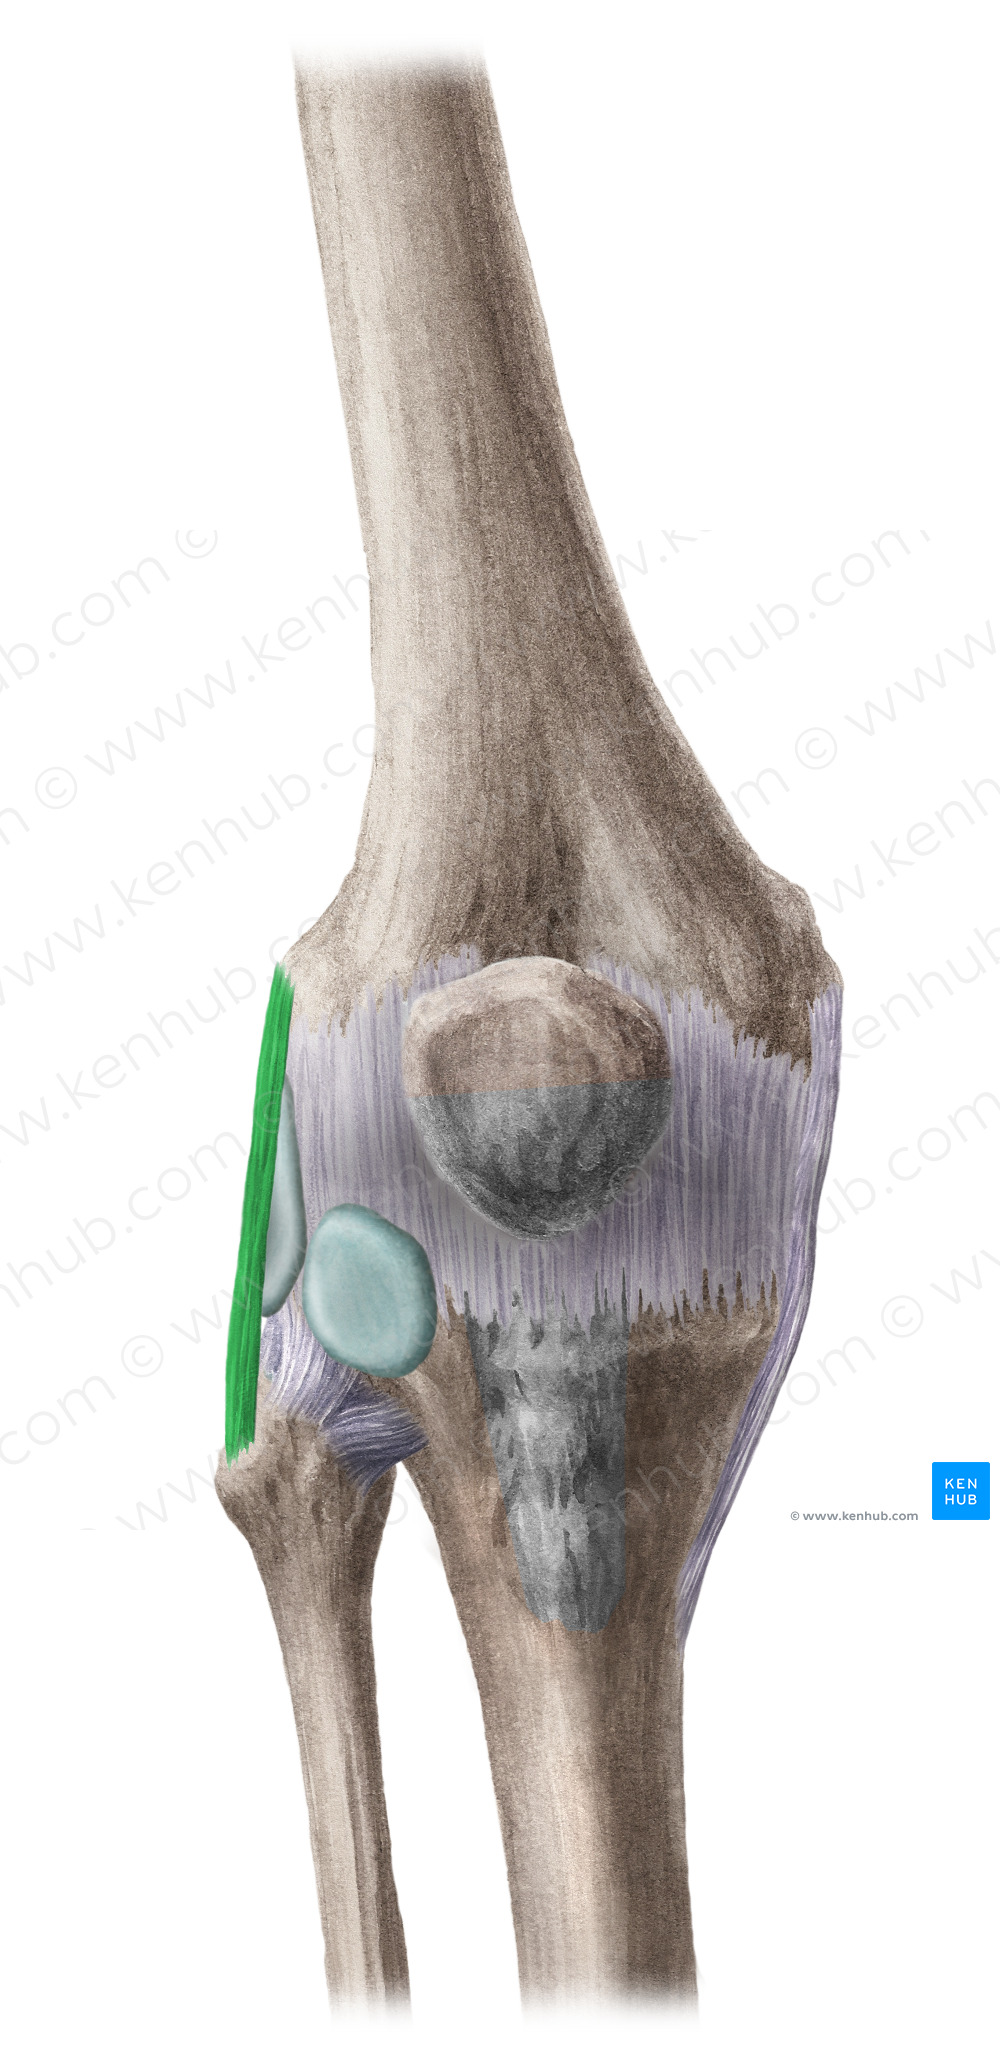 Fibular collateral ligament of knee joint (#4490)